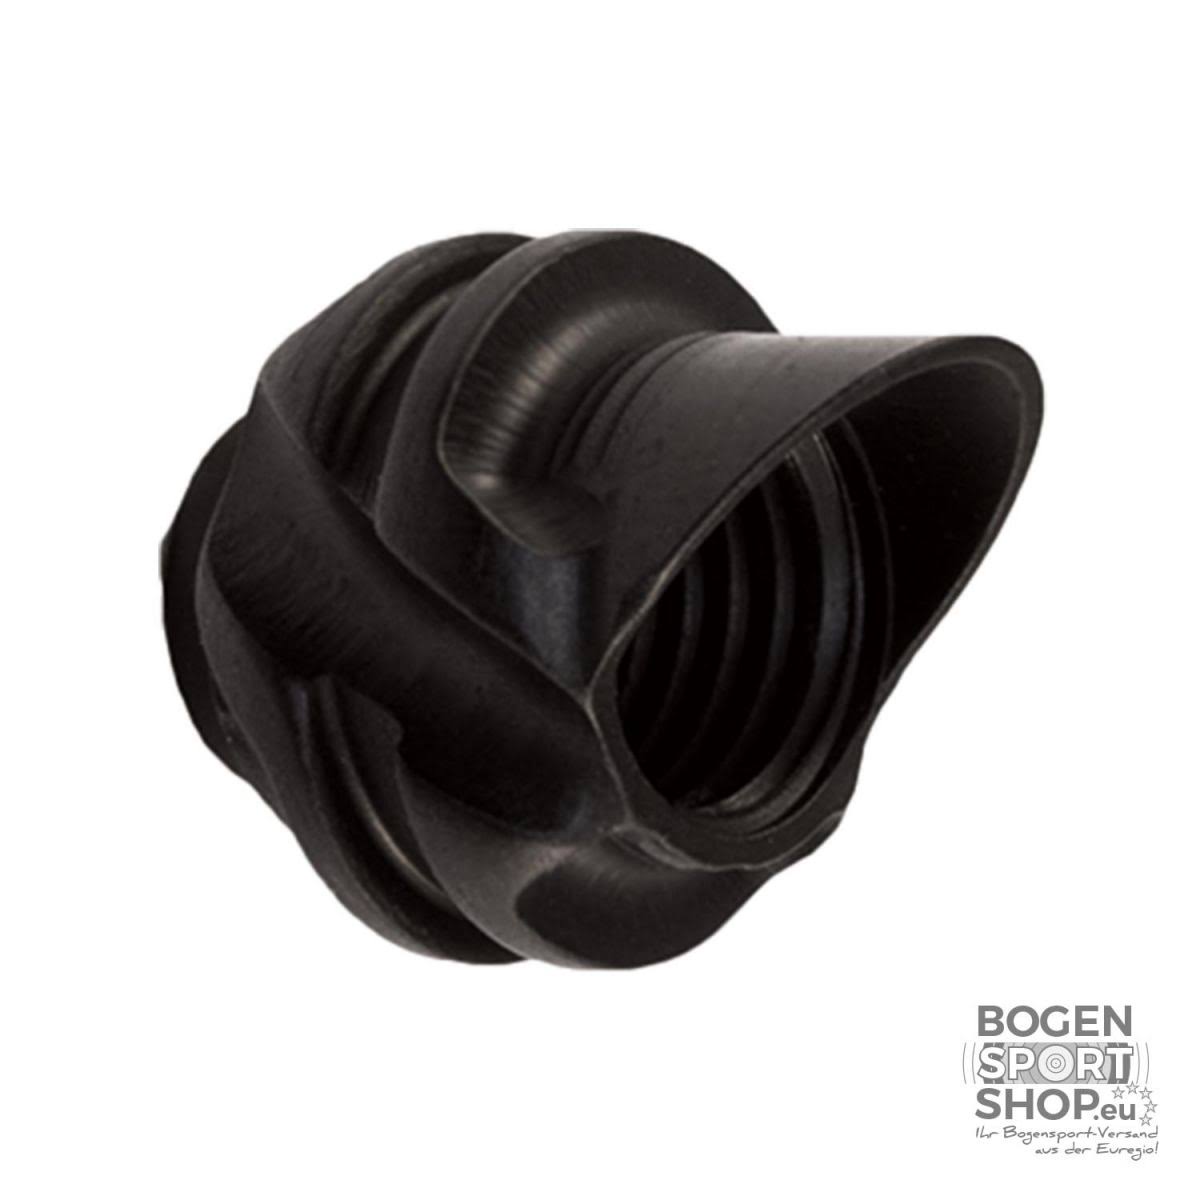 Specialty Pro Series Hooded Super Ball Peep Housing - Black, 37 Degree